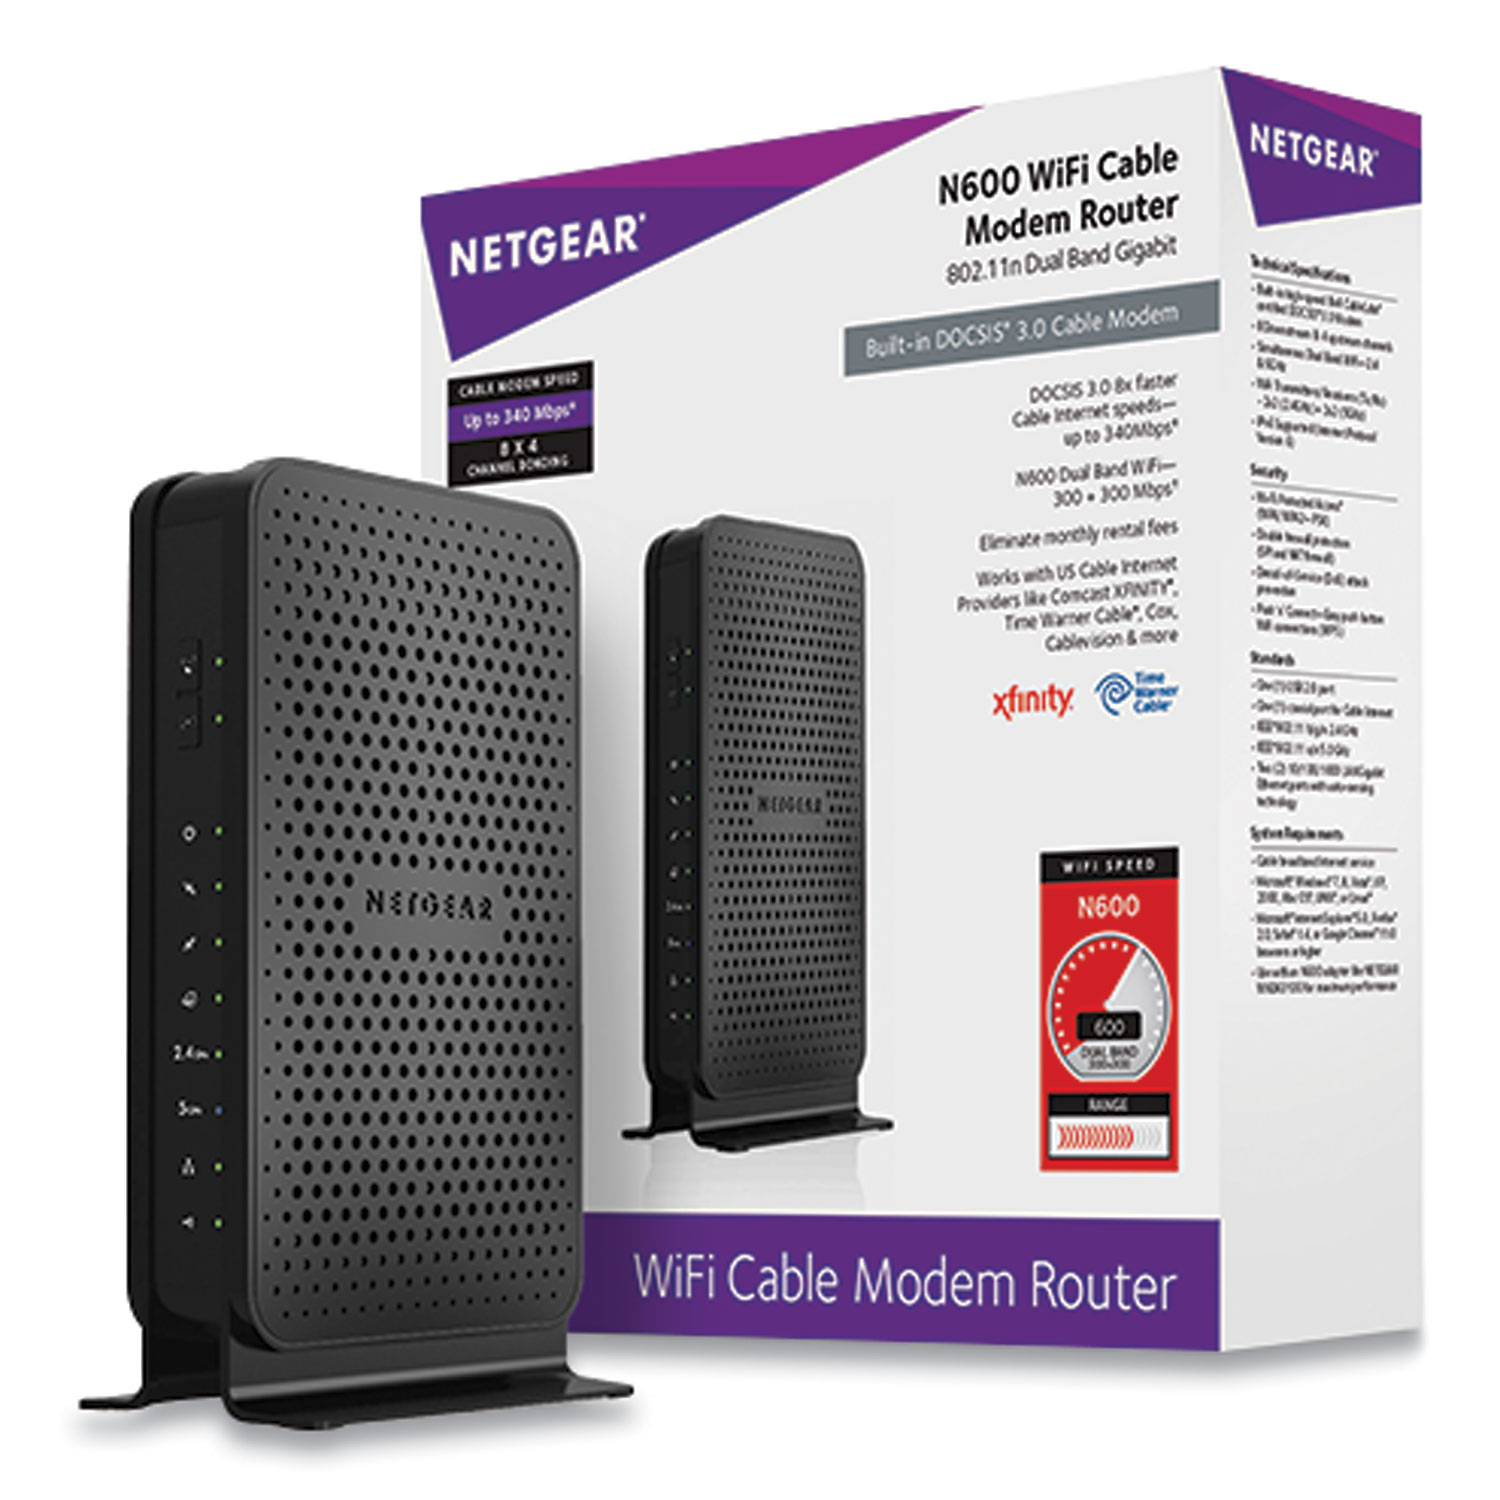 NETGEAR® N600 Wi-Fi Cable Modem Router, 2 Ports, Dual-Band 2.4 GHz/5 GHz